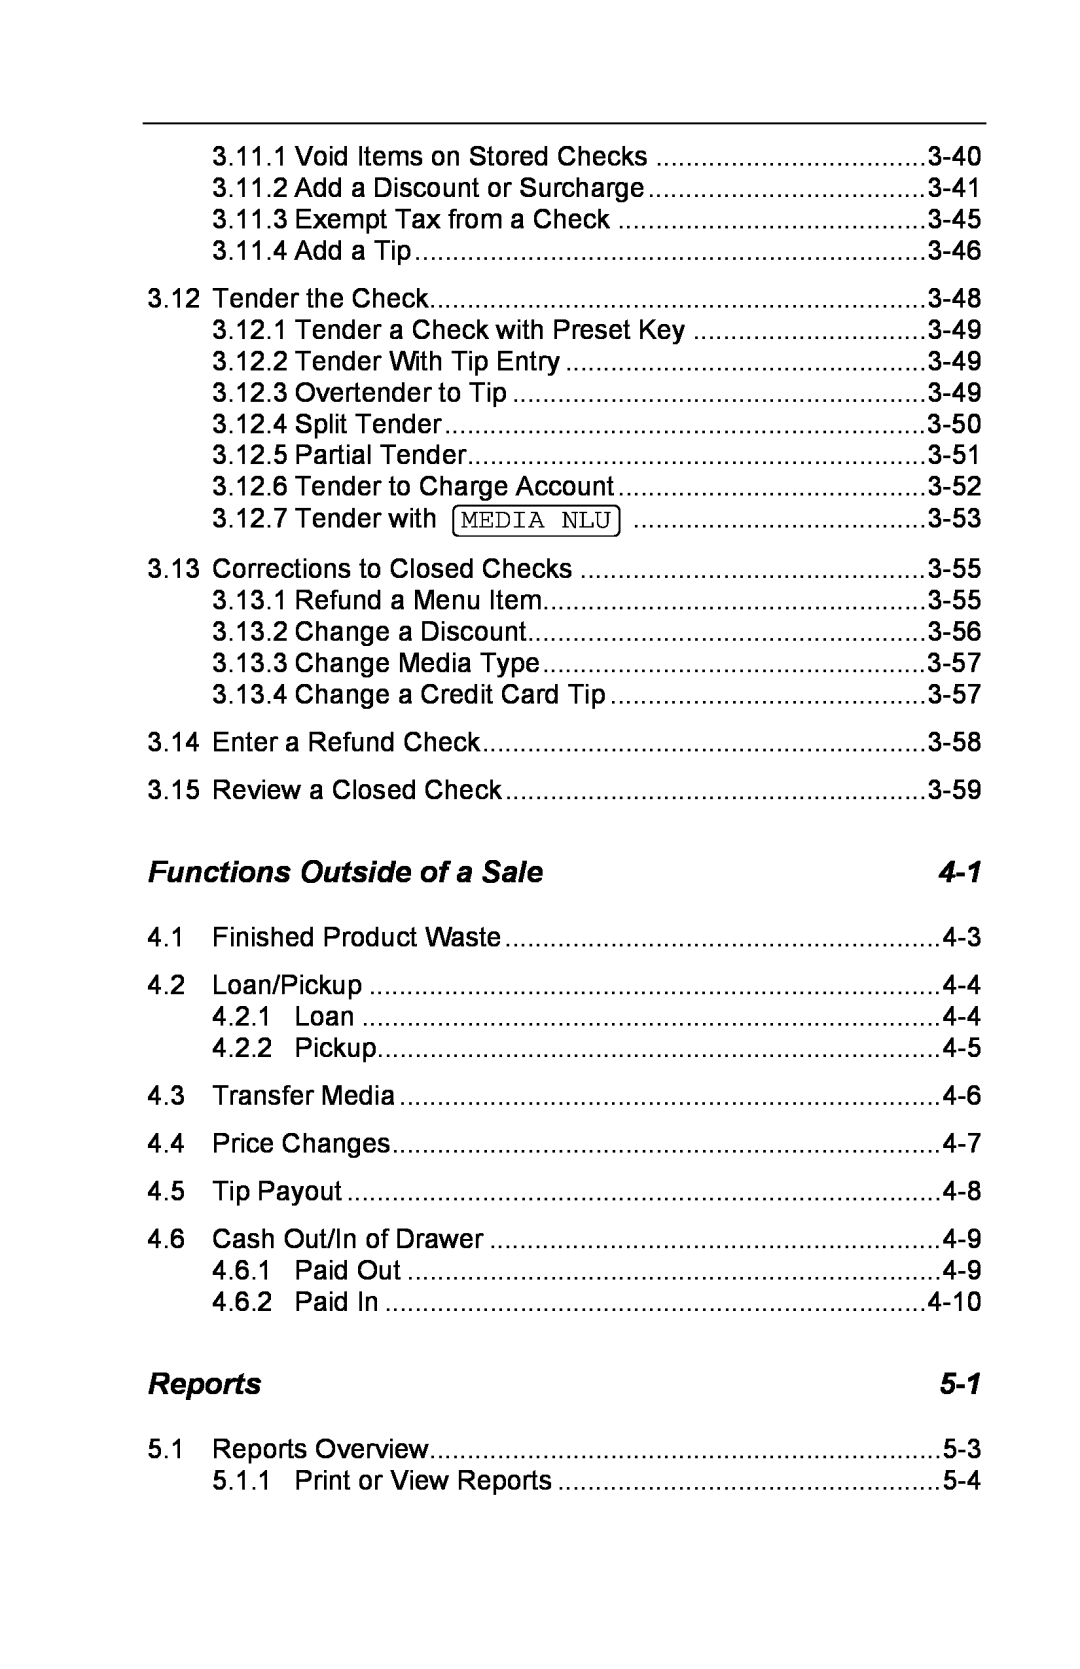 Toshiba FS-3600 owner manual Functions Outside of a Sale, Reports 